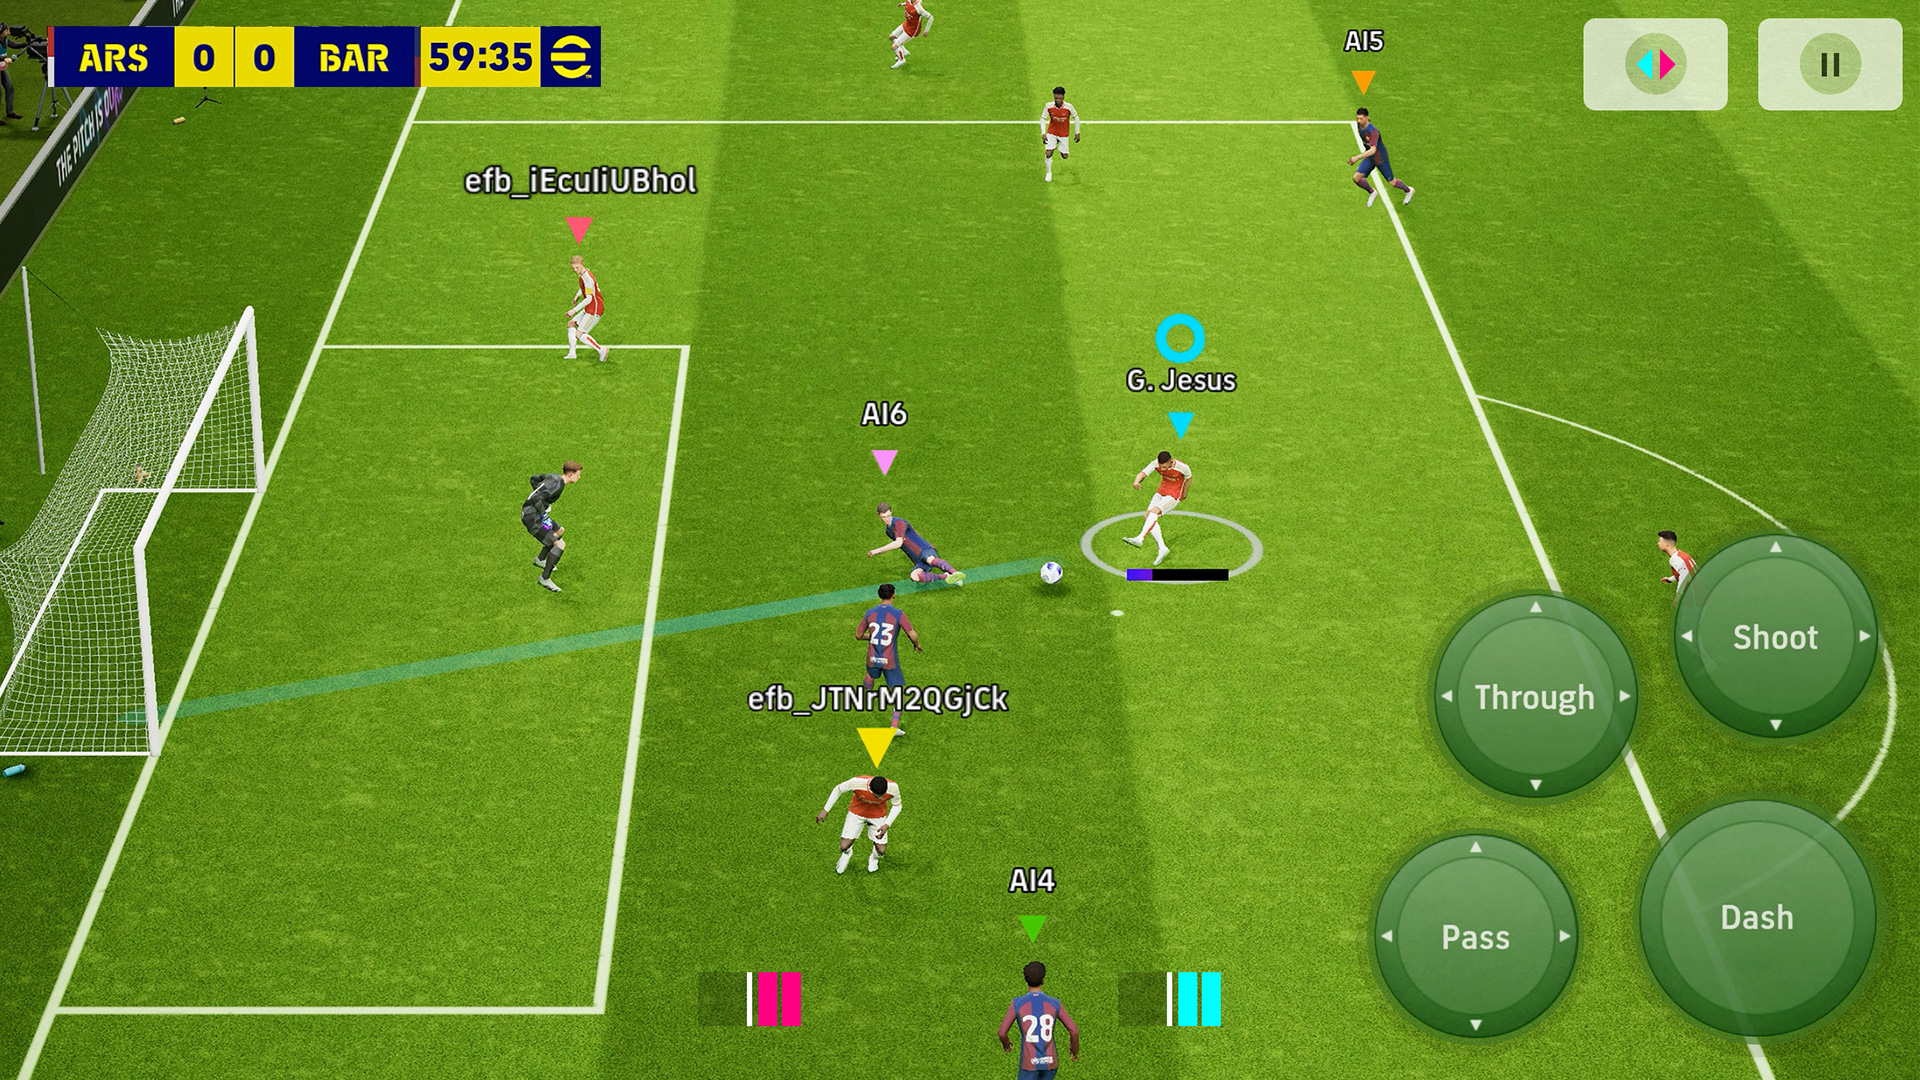 Game Hub - PES (Coin & Player Pack)